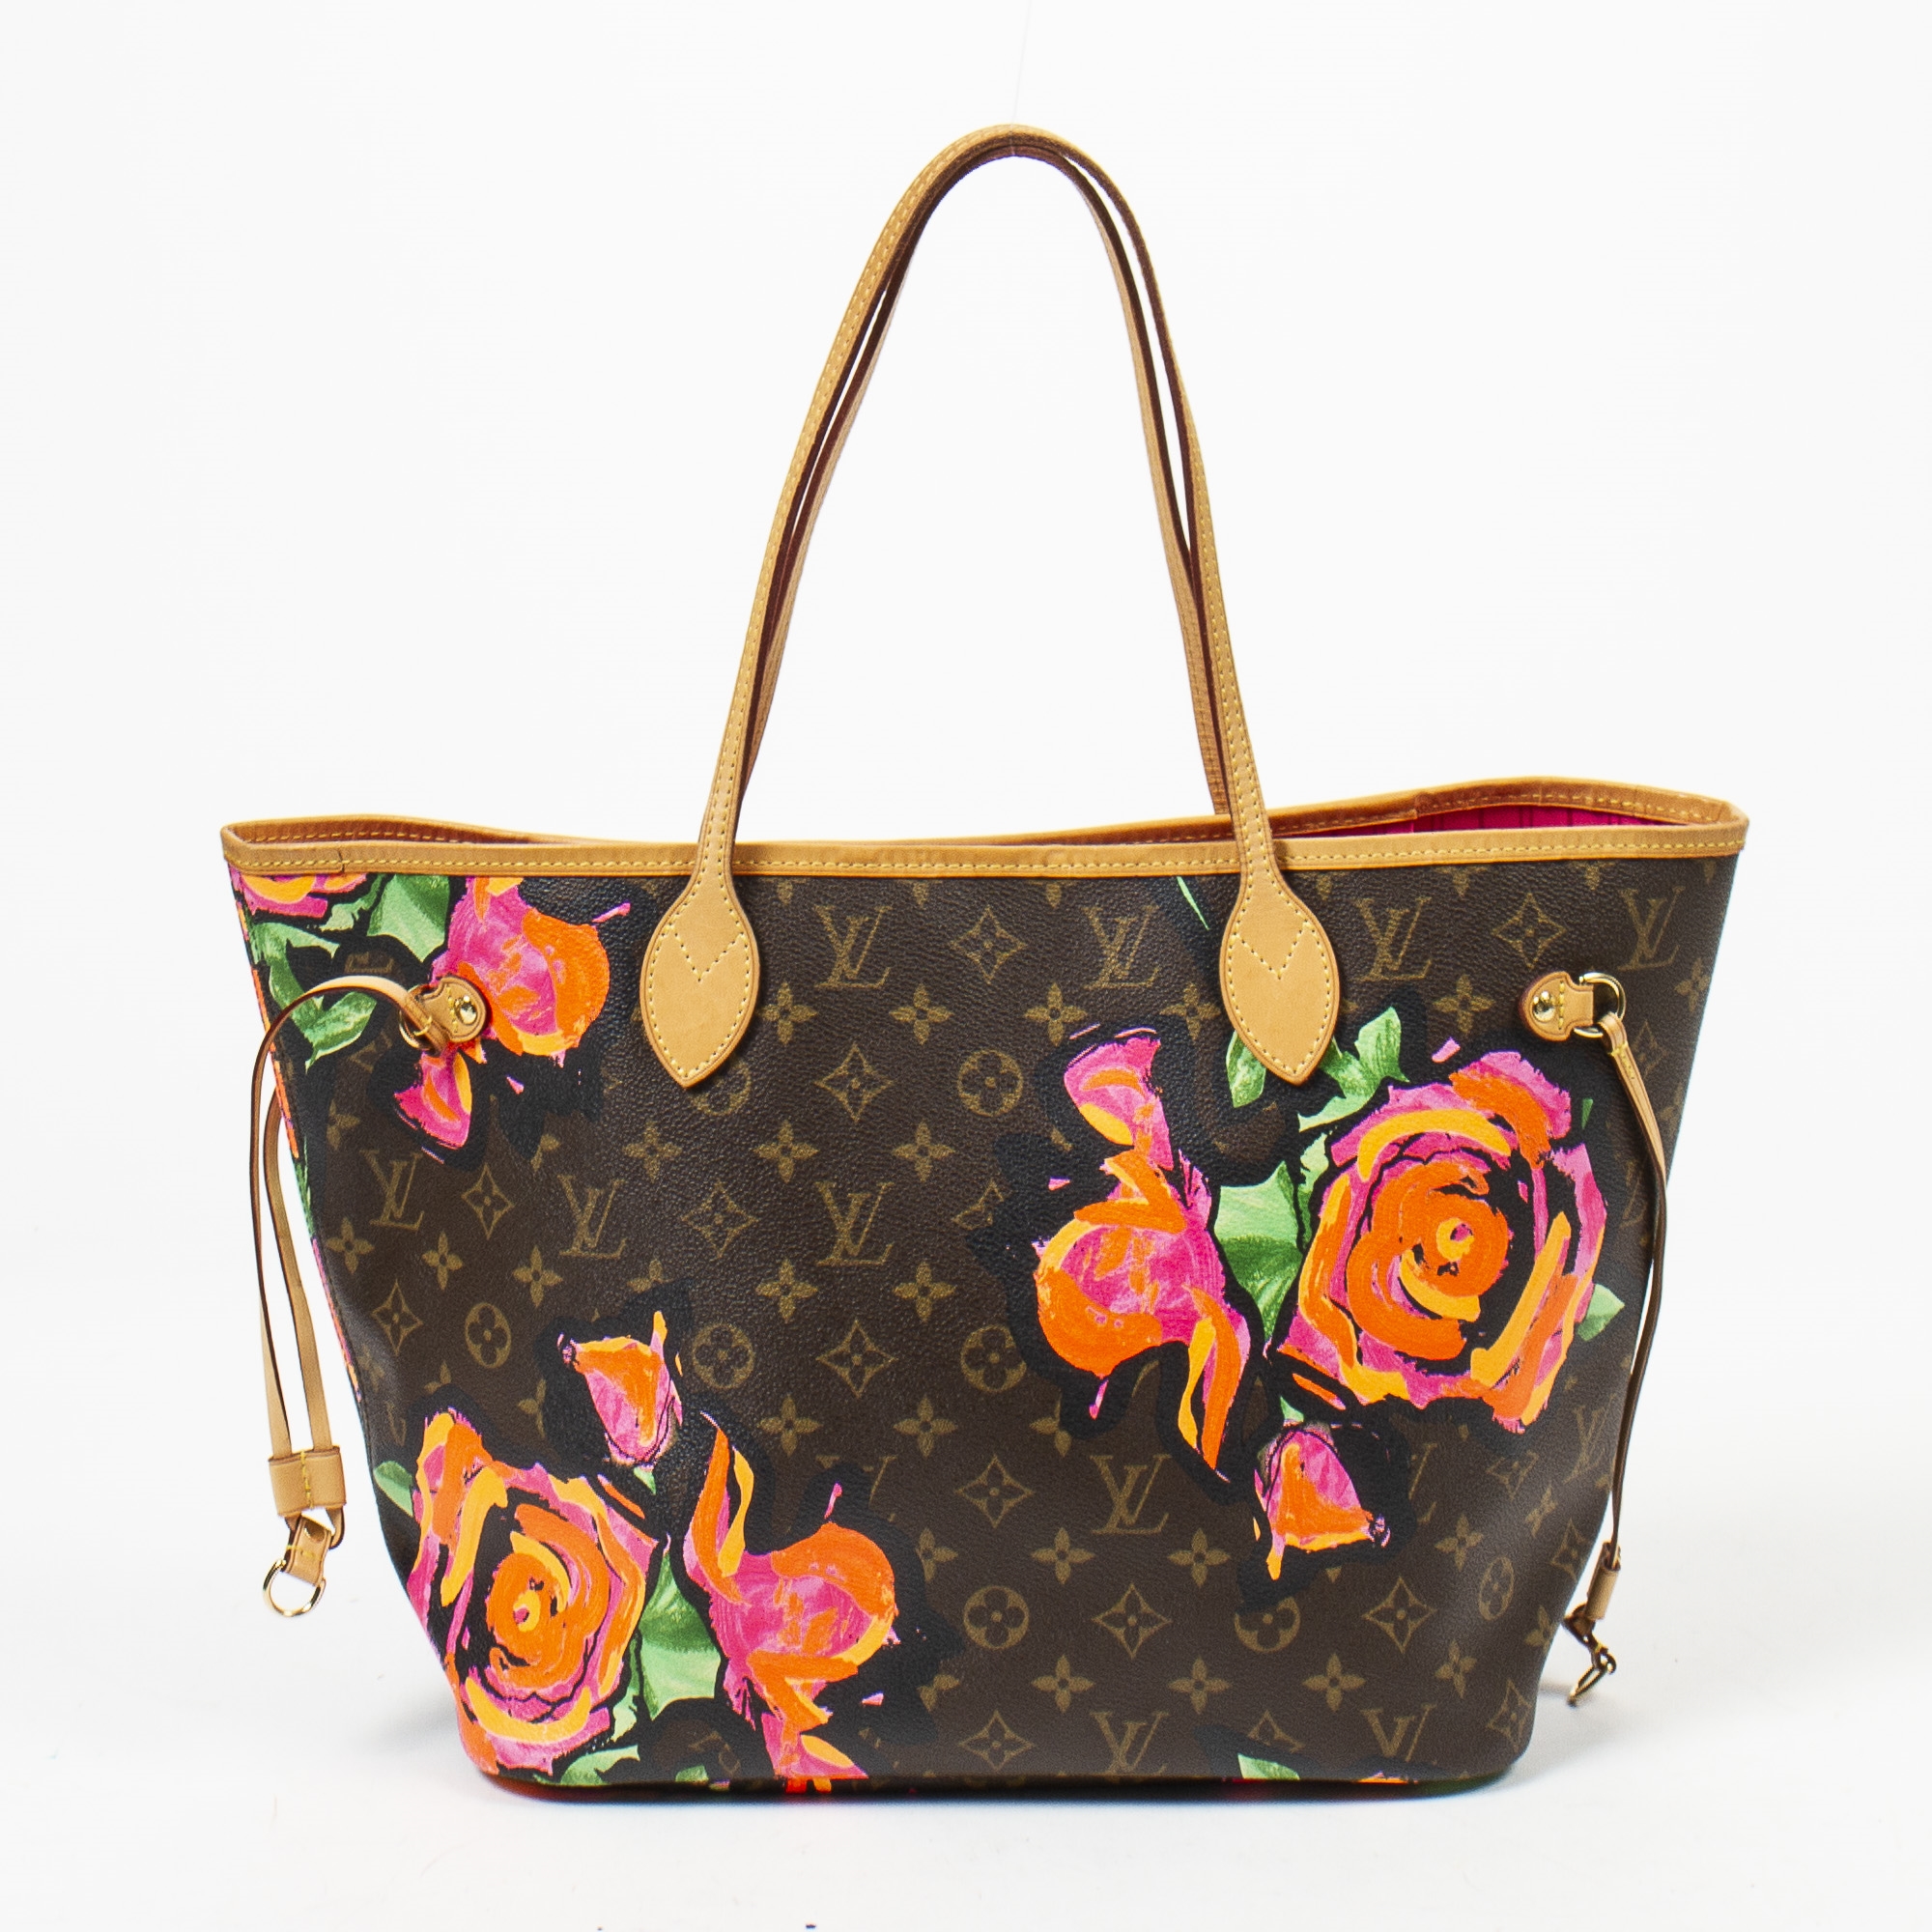 Sold at Auction: Limited Edition 2016 Louis Vuitton 'Neverfull' Bag